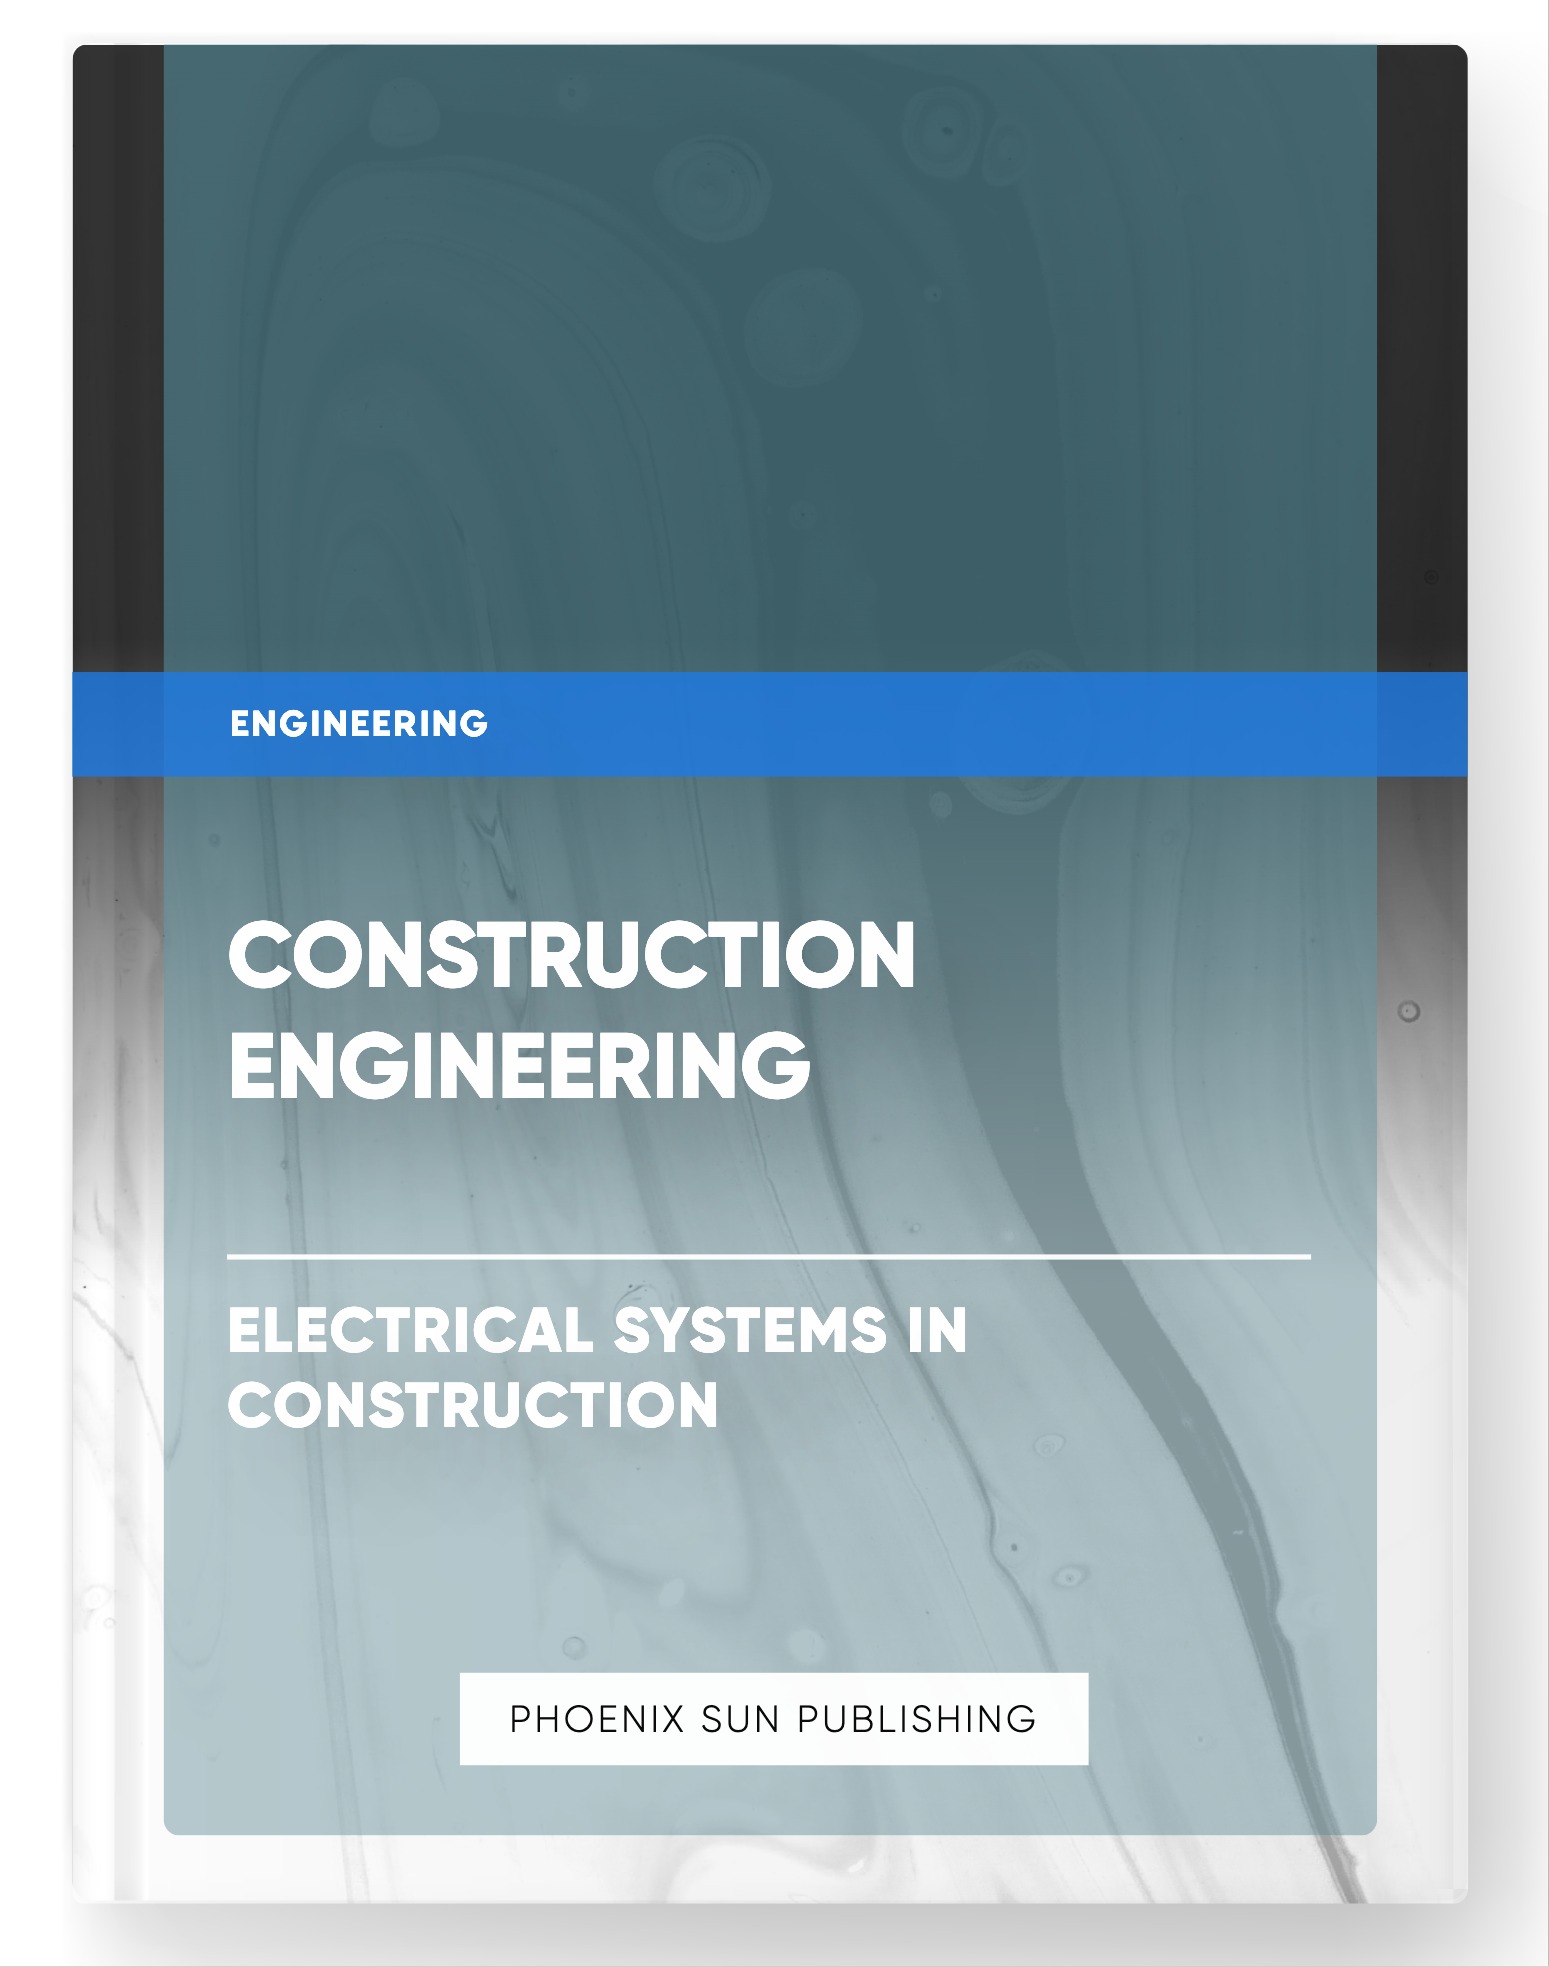 Construction Engineering – Electrical Systems in Construction